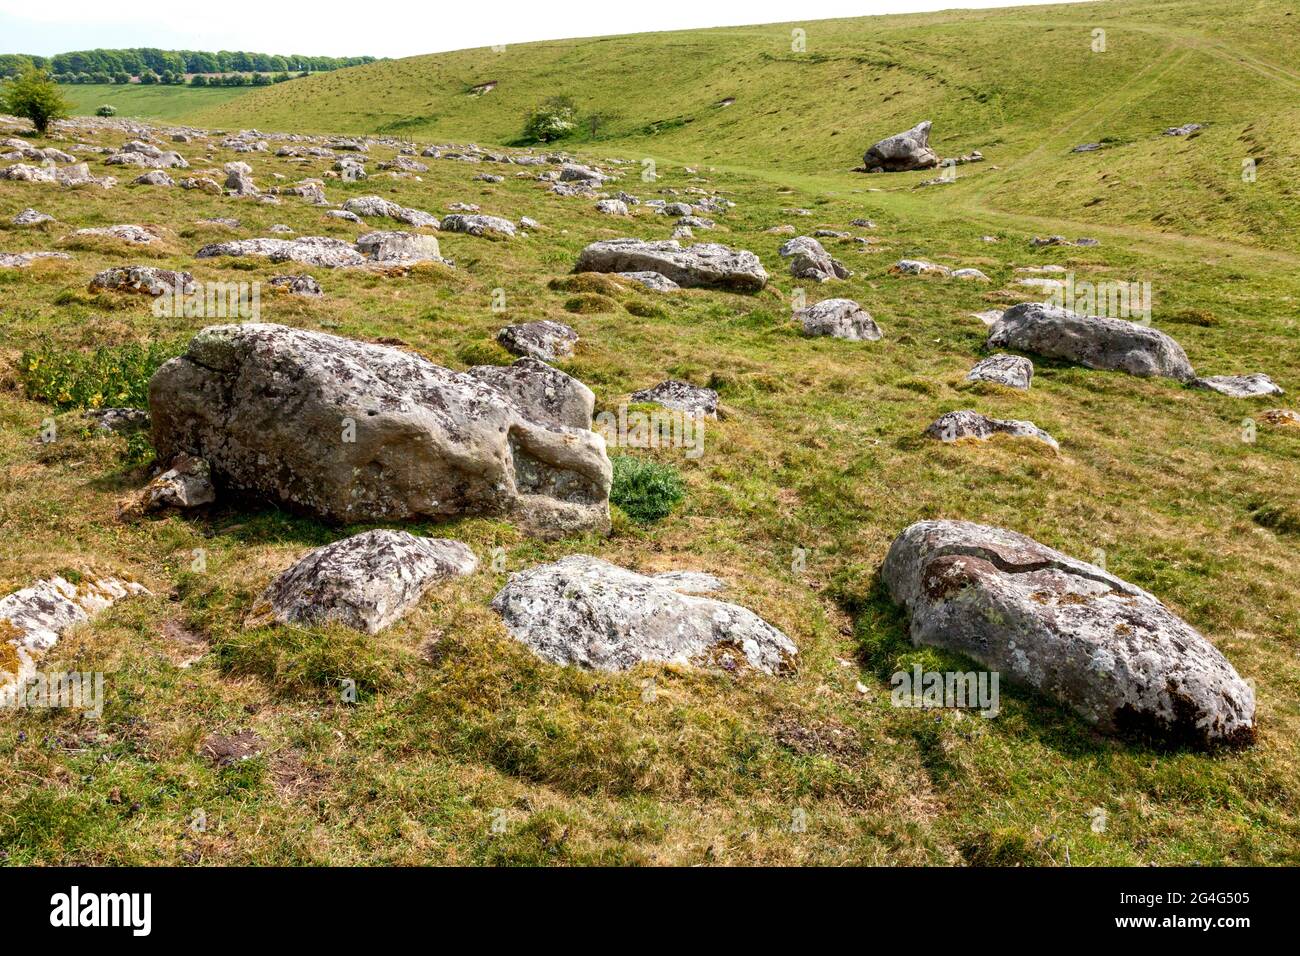 Sarsen stones at Grey Wethers on Fyfield Down in Witshire UK source of the megaliths at the nearby Avebury stone circles Stock Photo